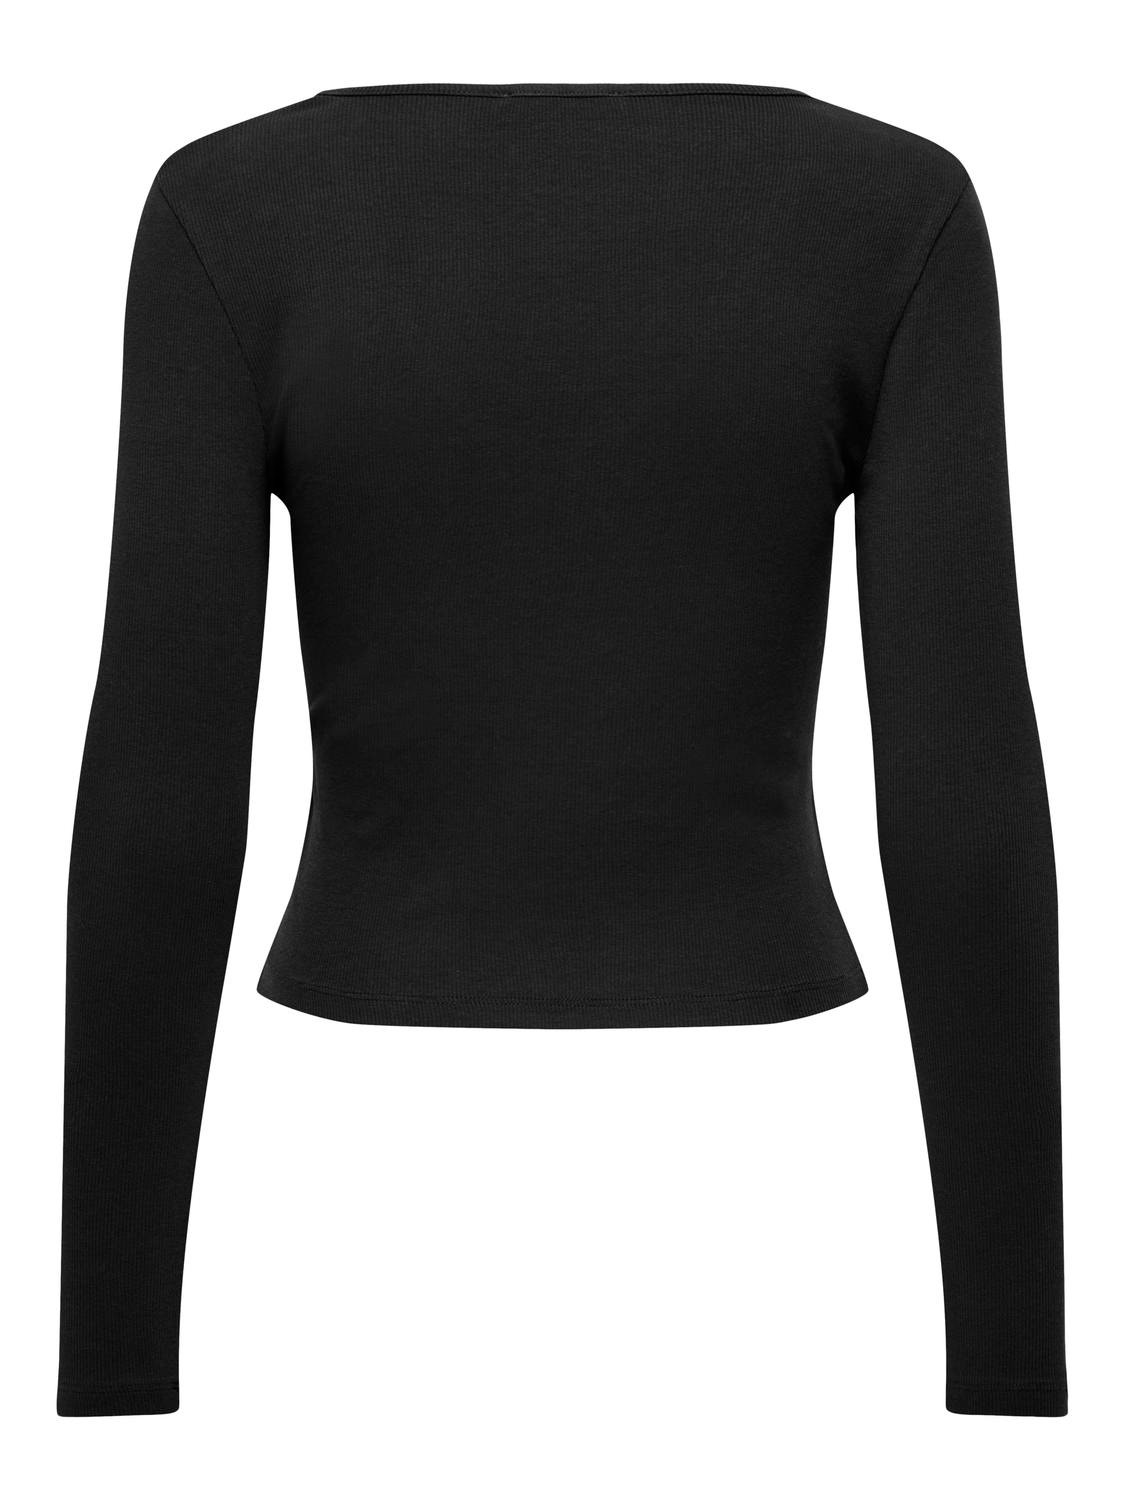 ONLY Tight Fit Round Neck T-Shirt -Black - 15290845